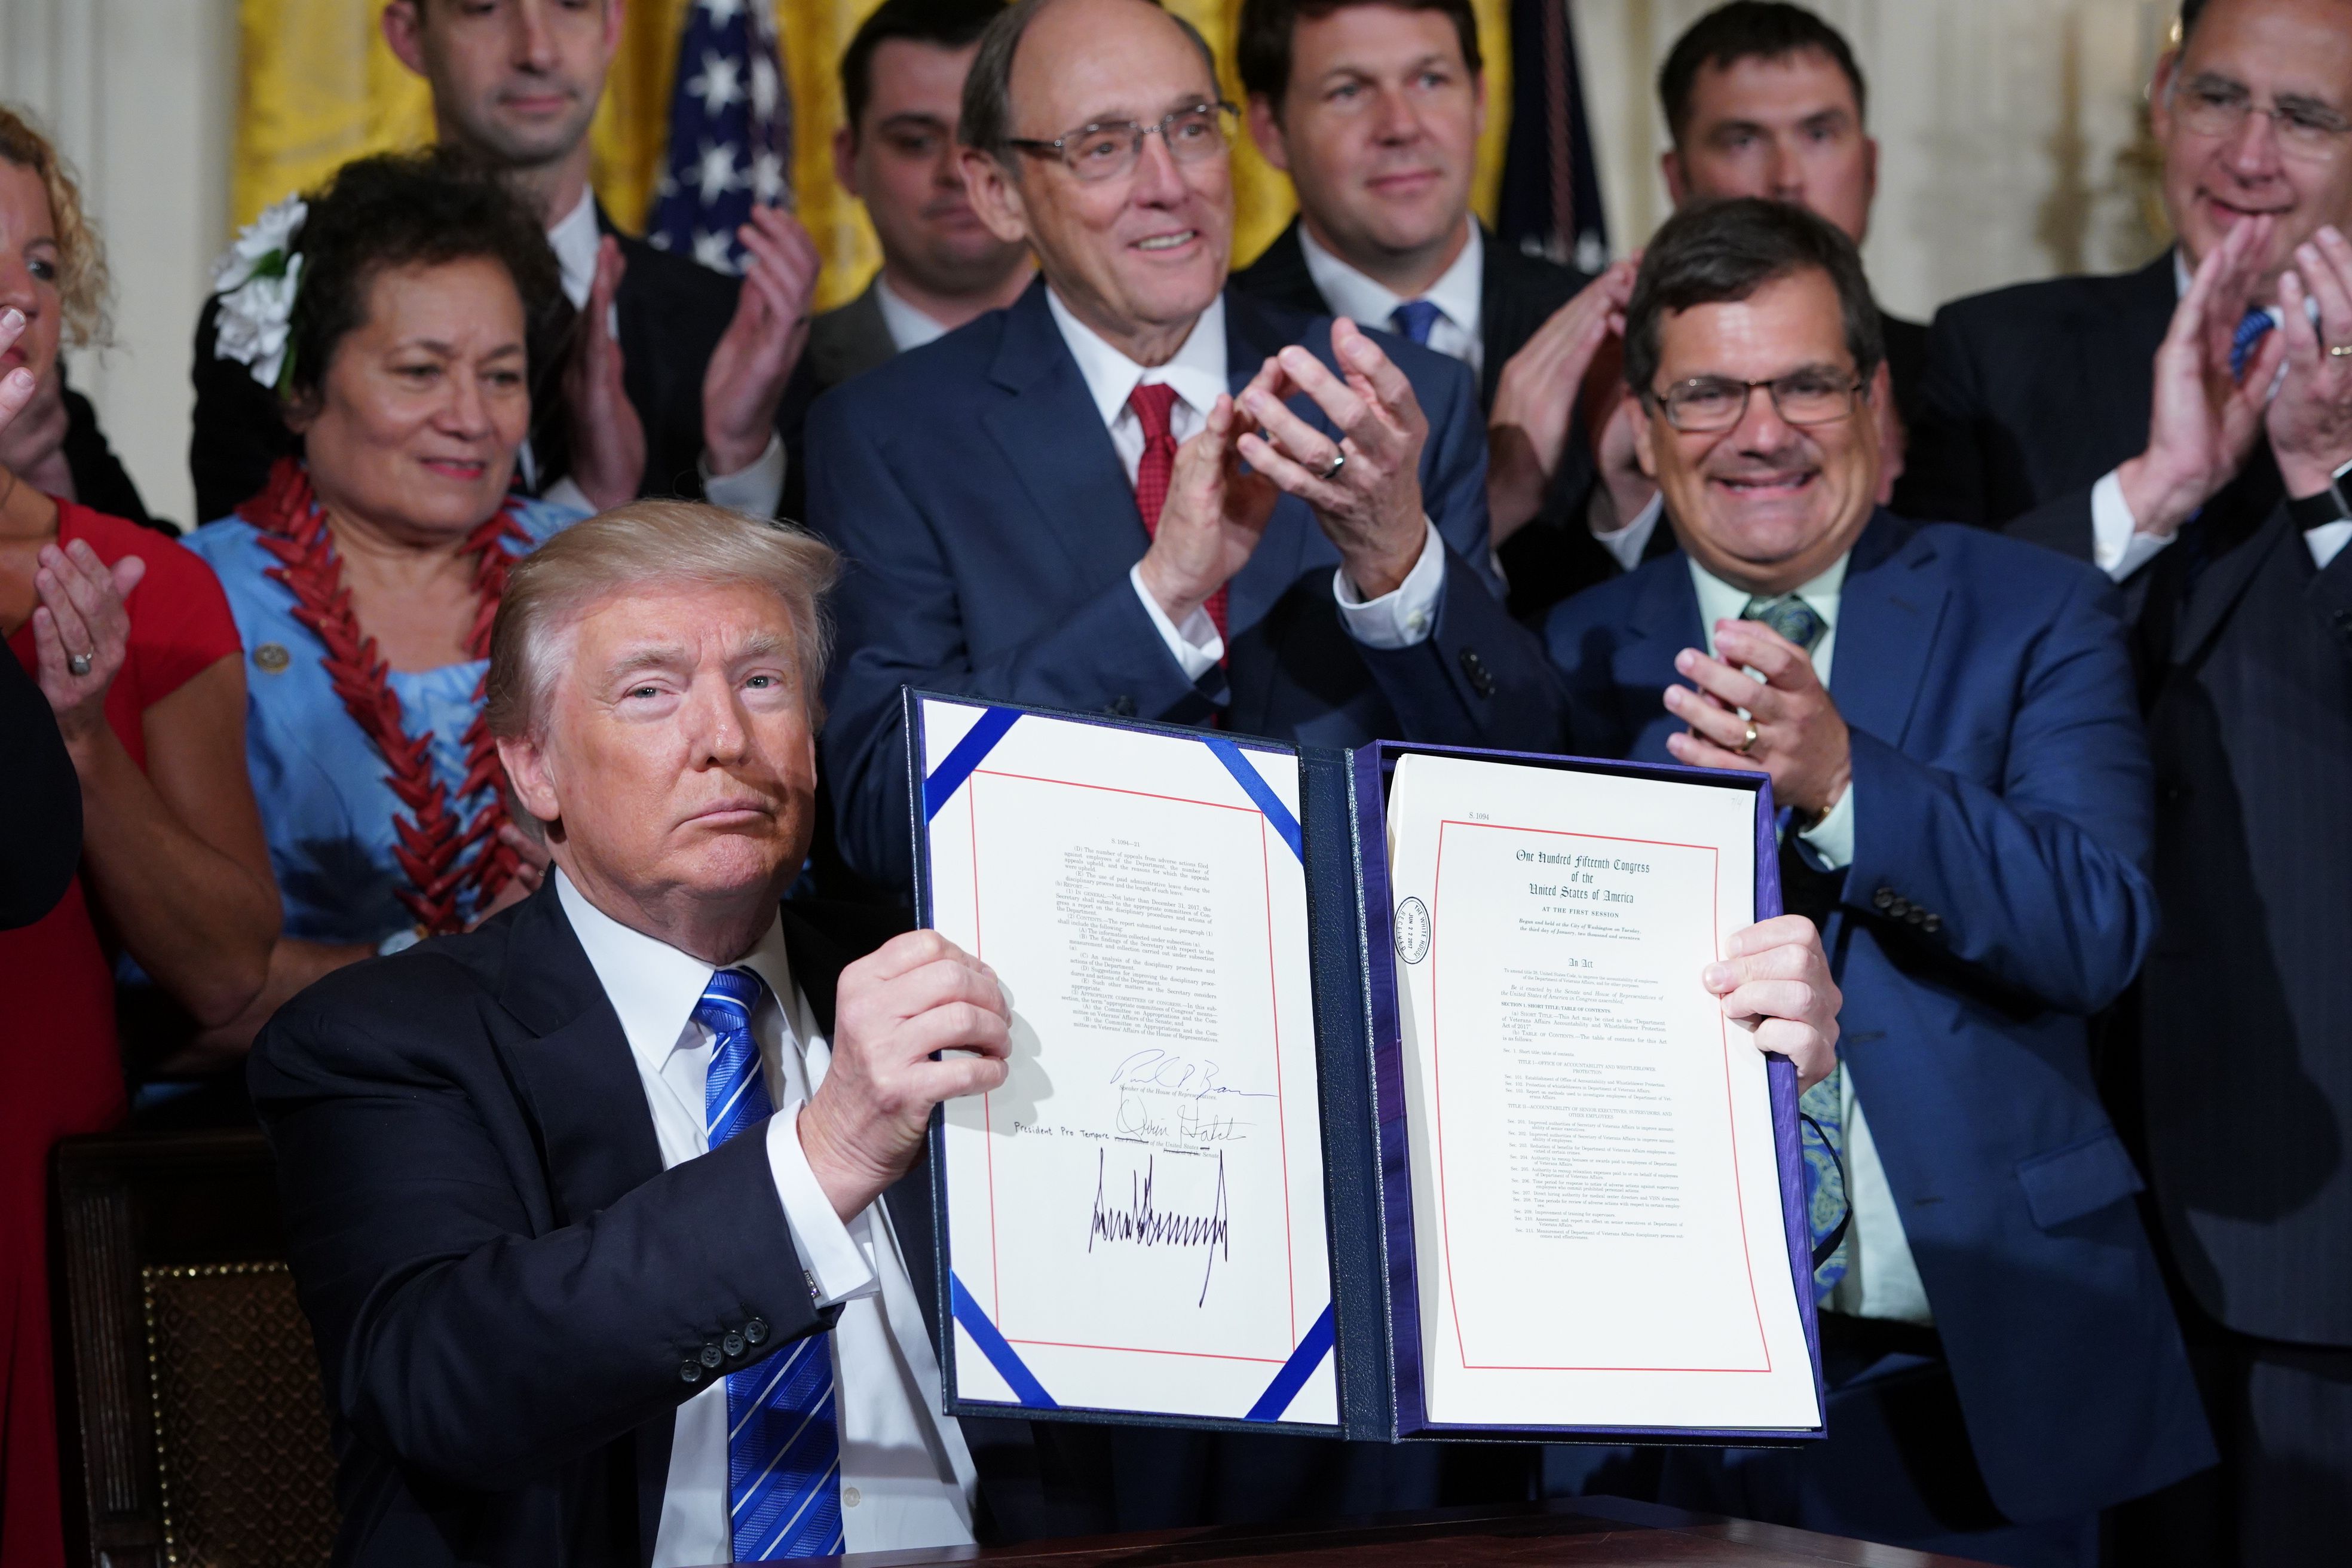 President Trump Signs VA Reform Bill to Fire Workers 'Who Let Our Veterans Down'
